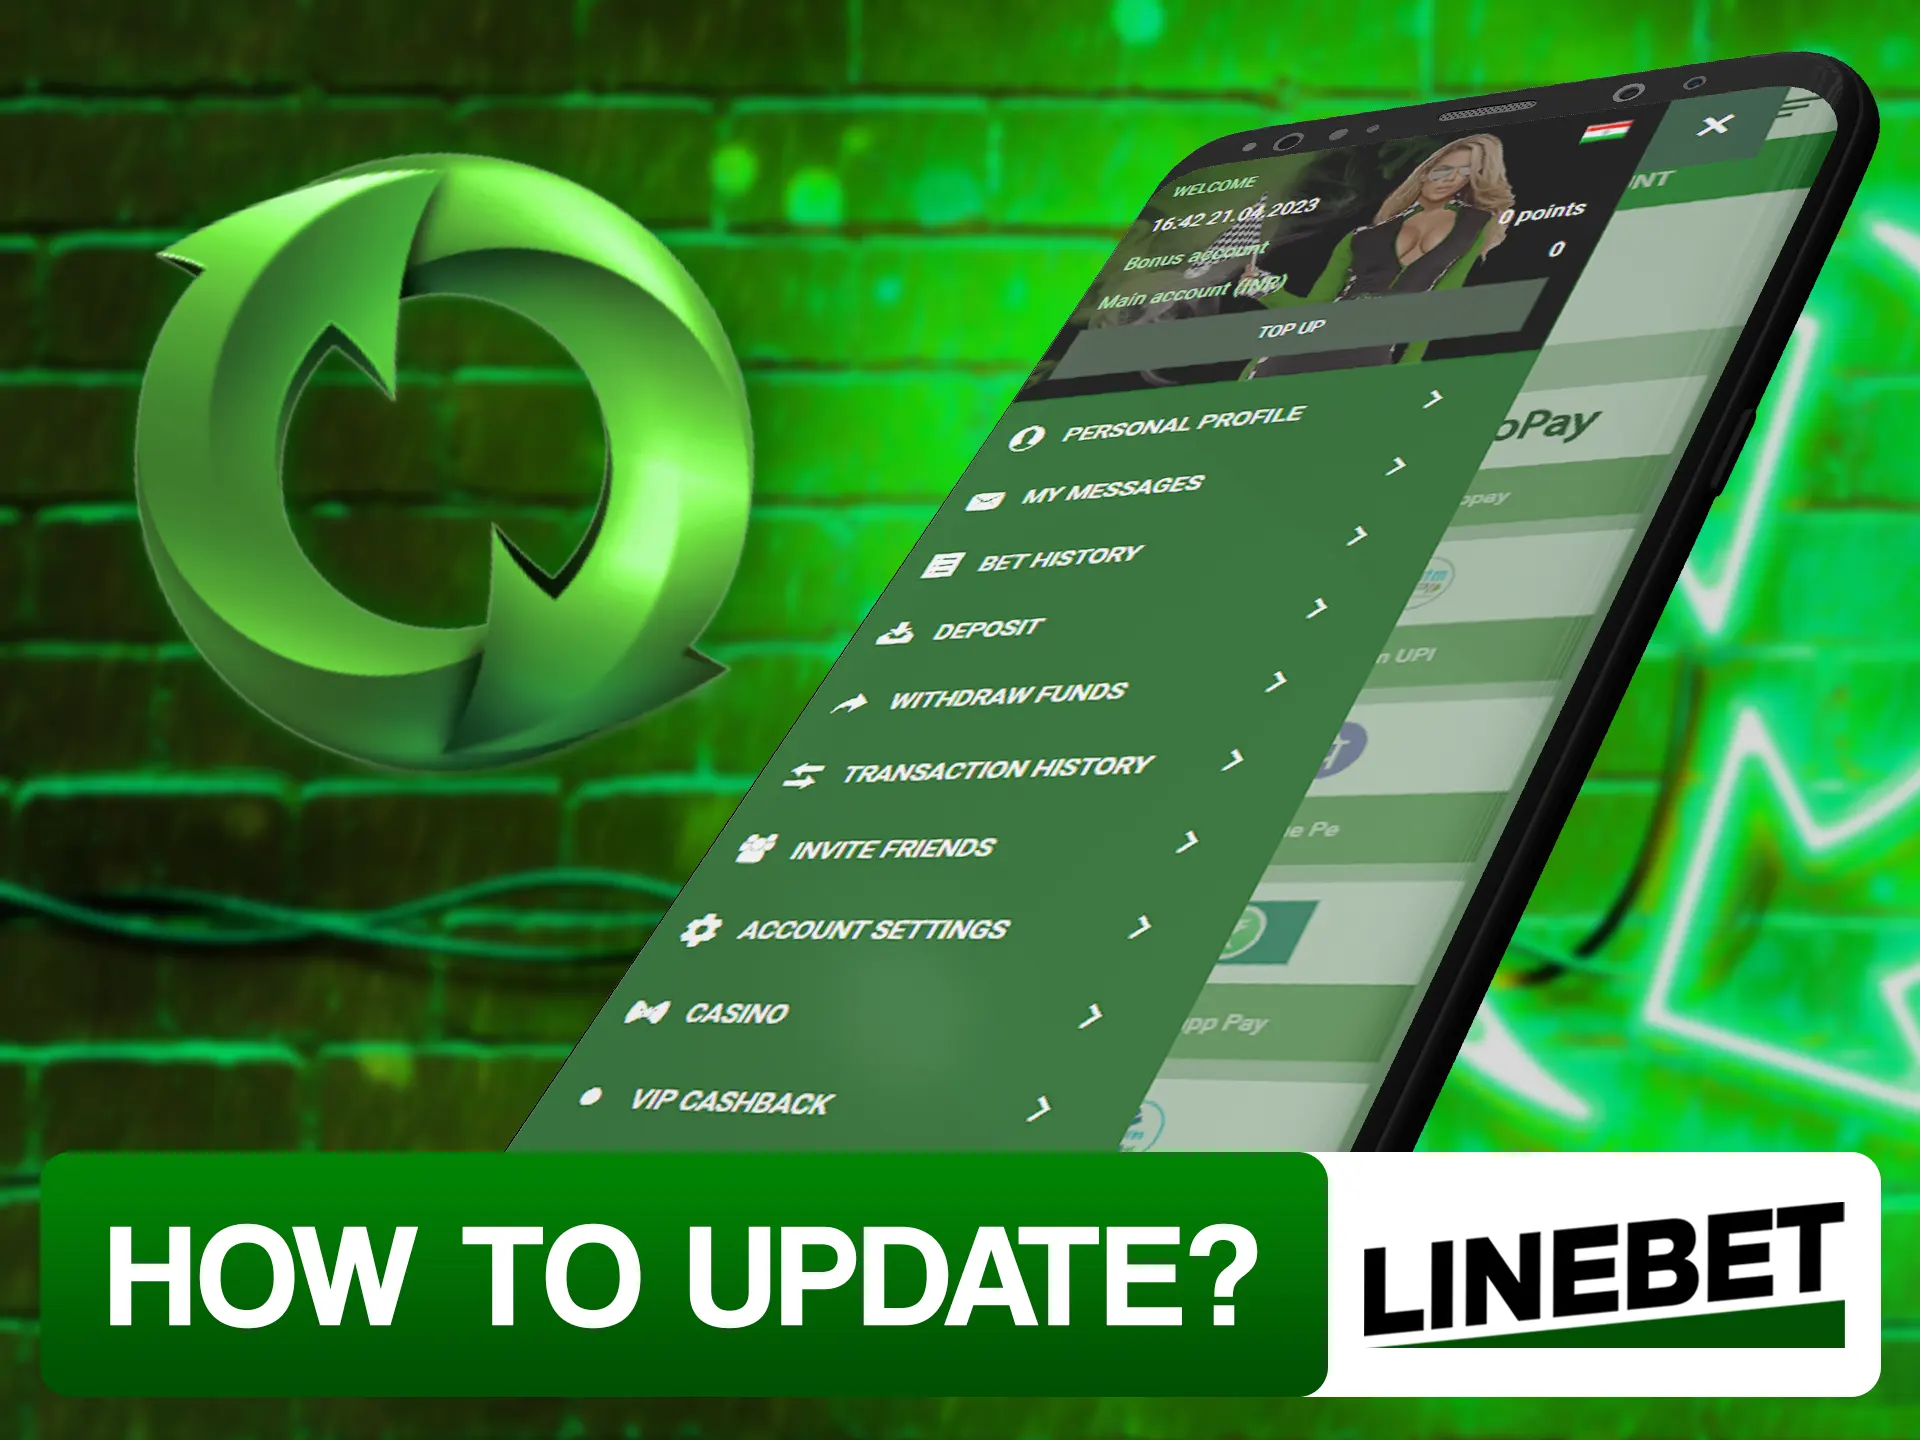 Your Linebet app updates automatically after logging in.